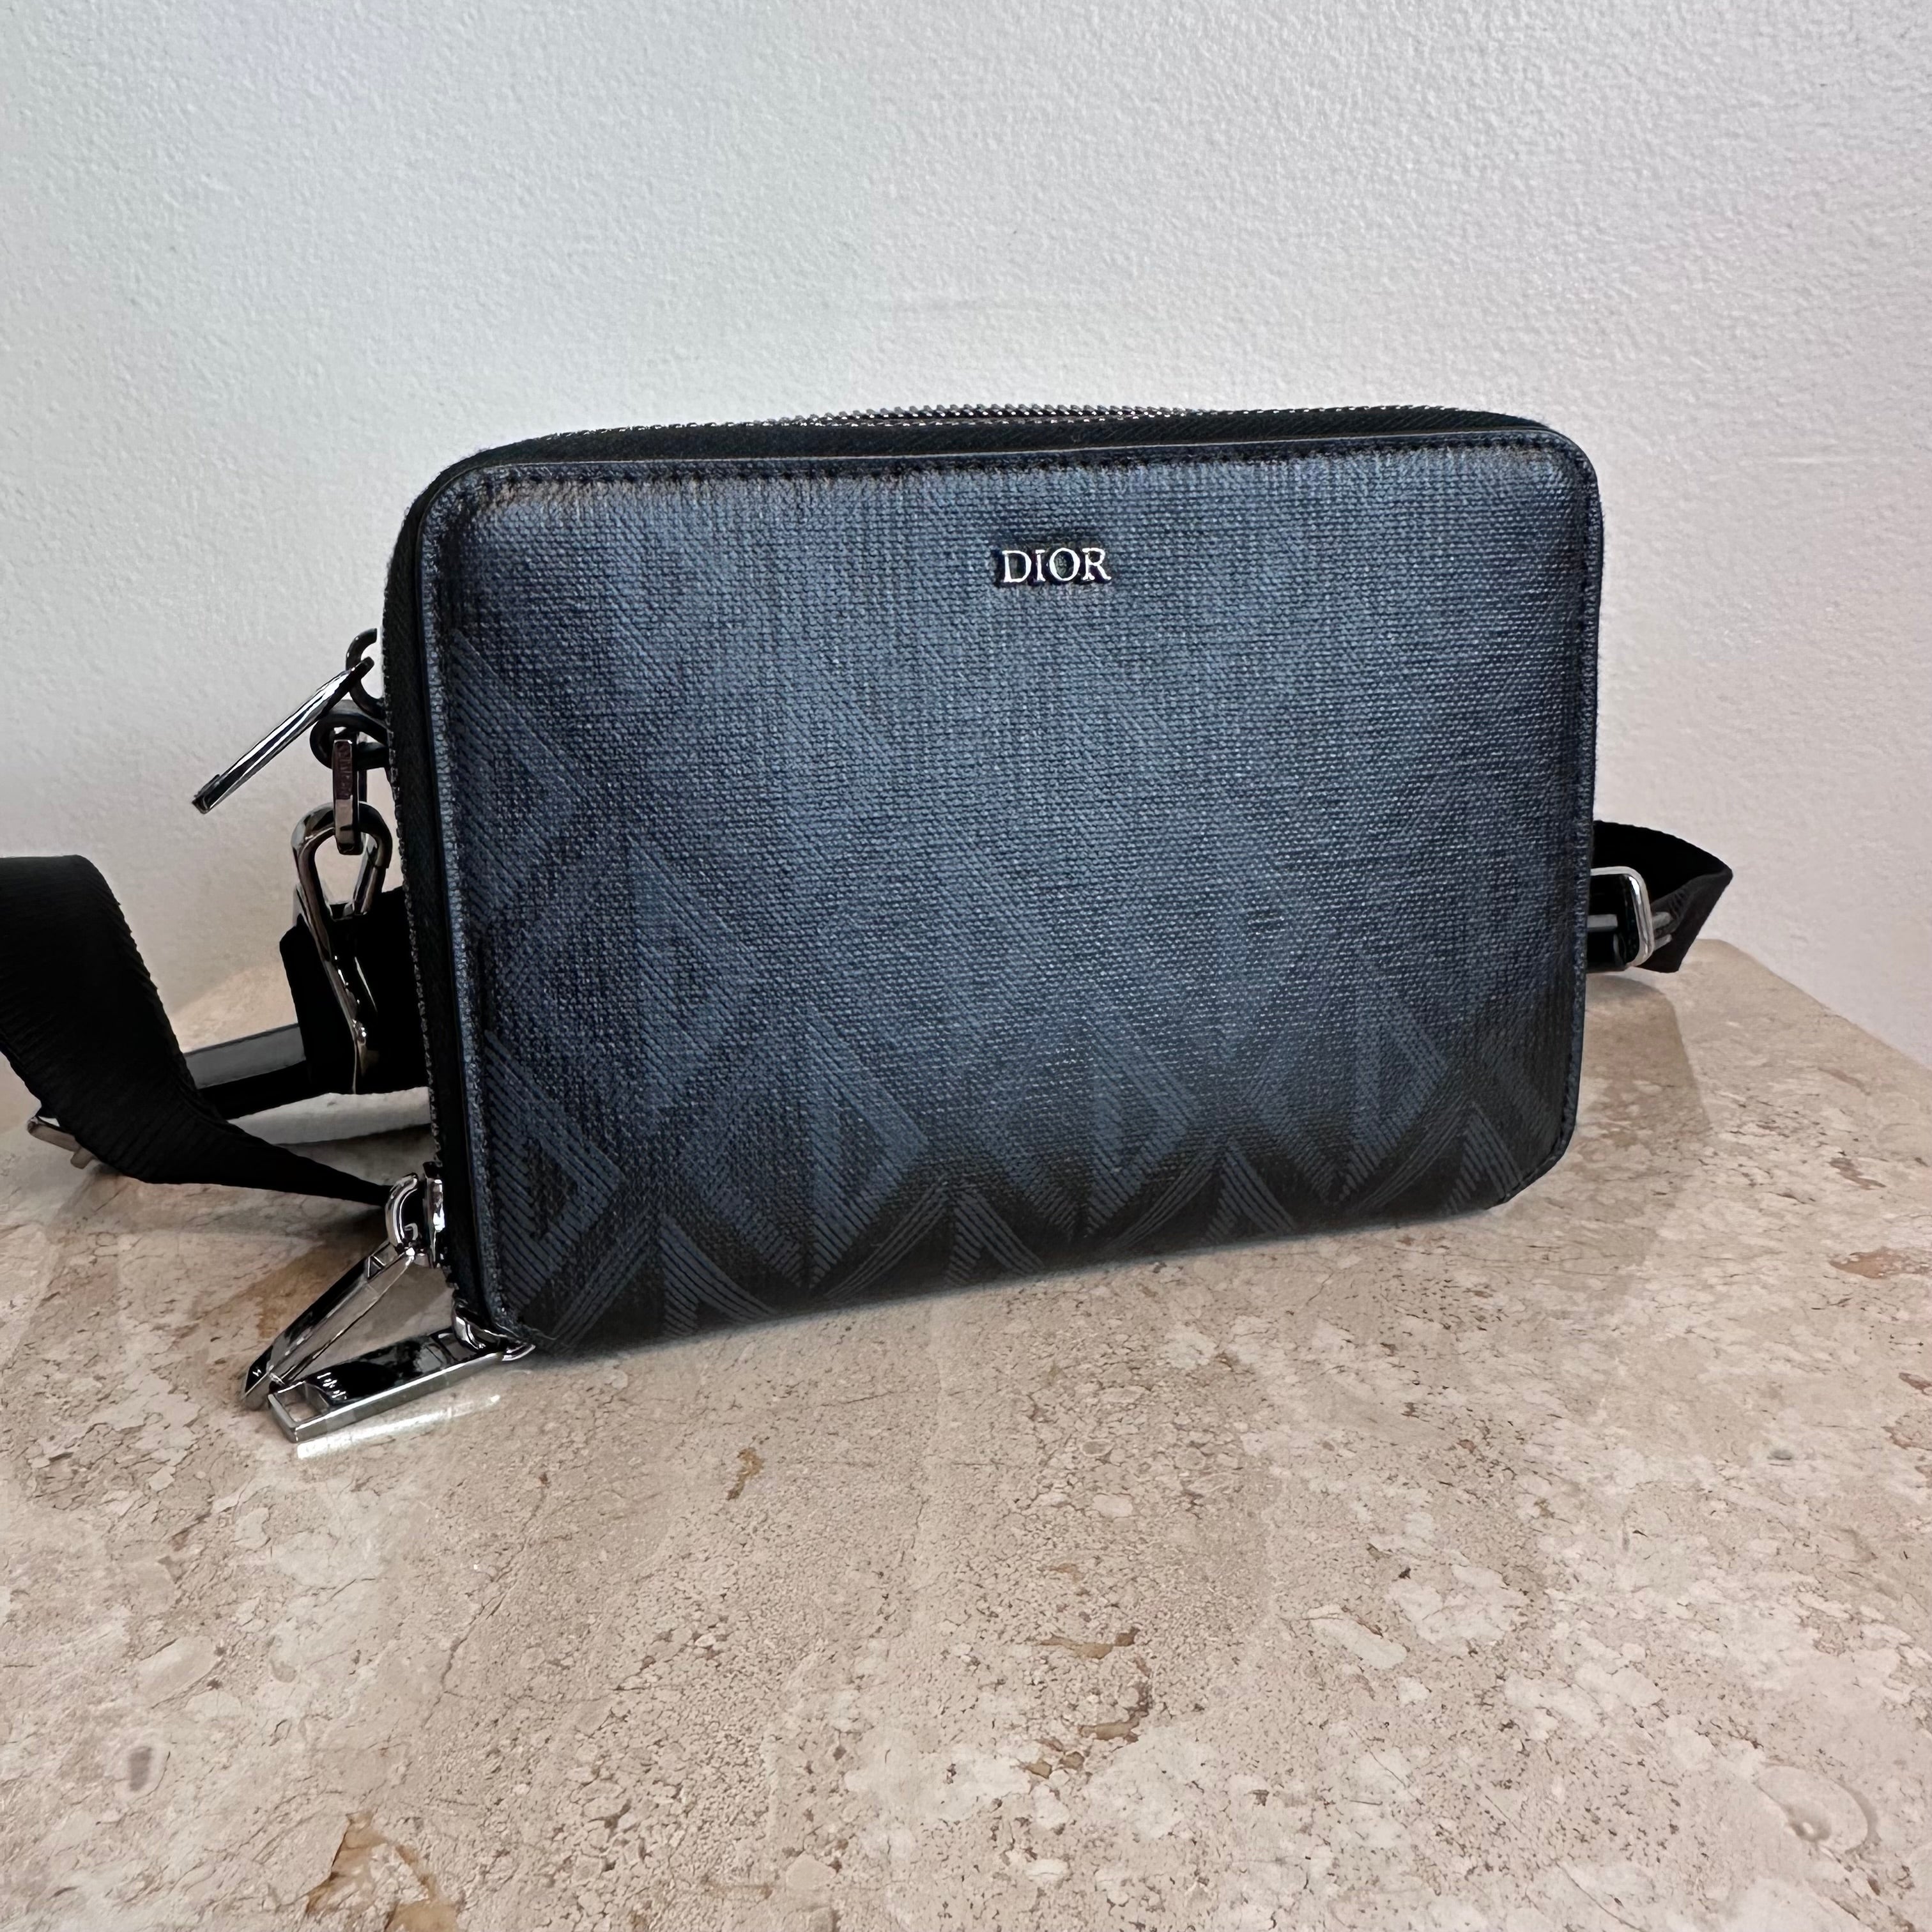 Pre-Owned DIOR CD Diamond Canvas Double Zip Crossbody Pouch